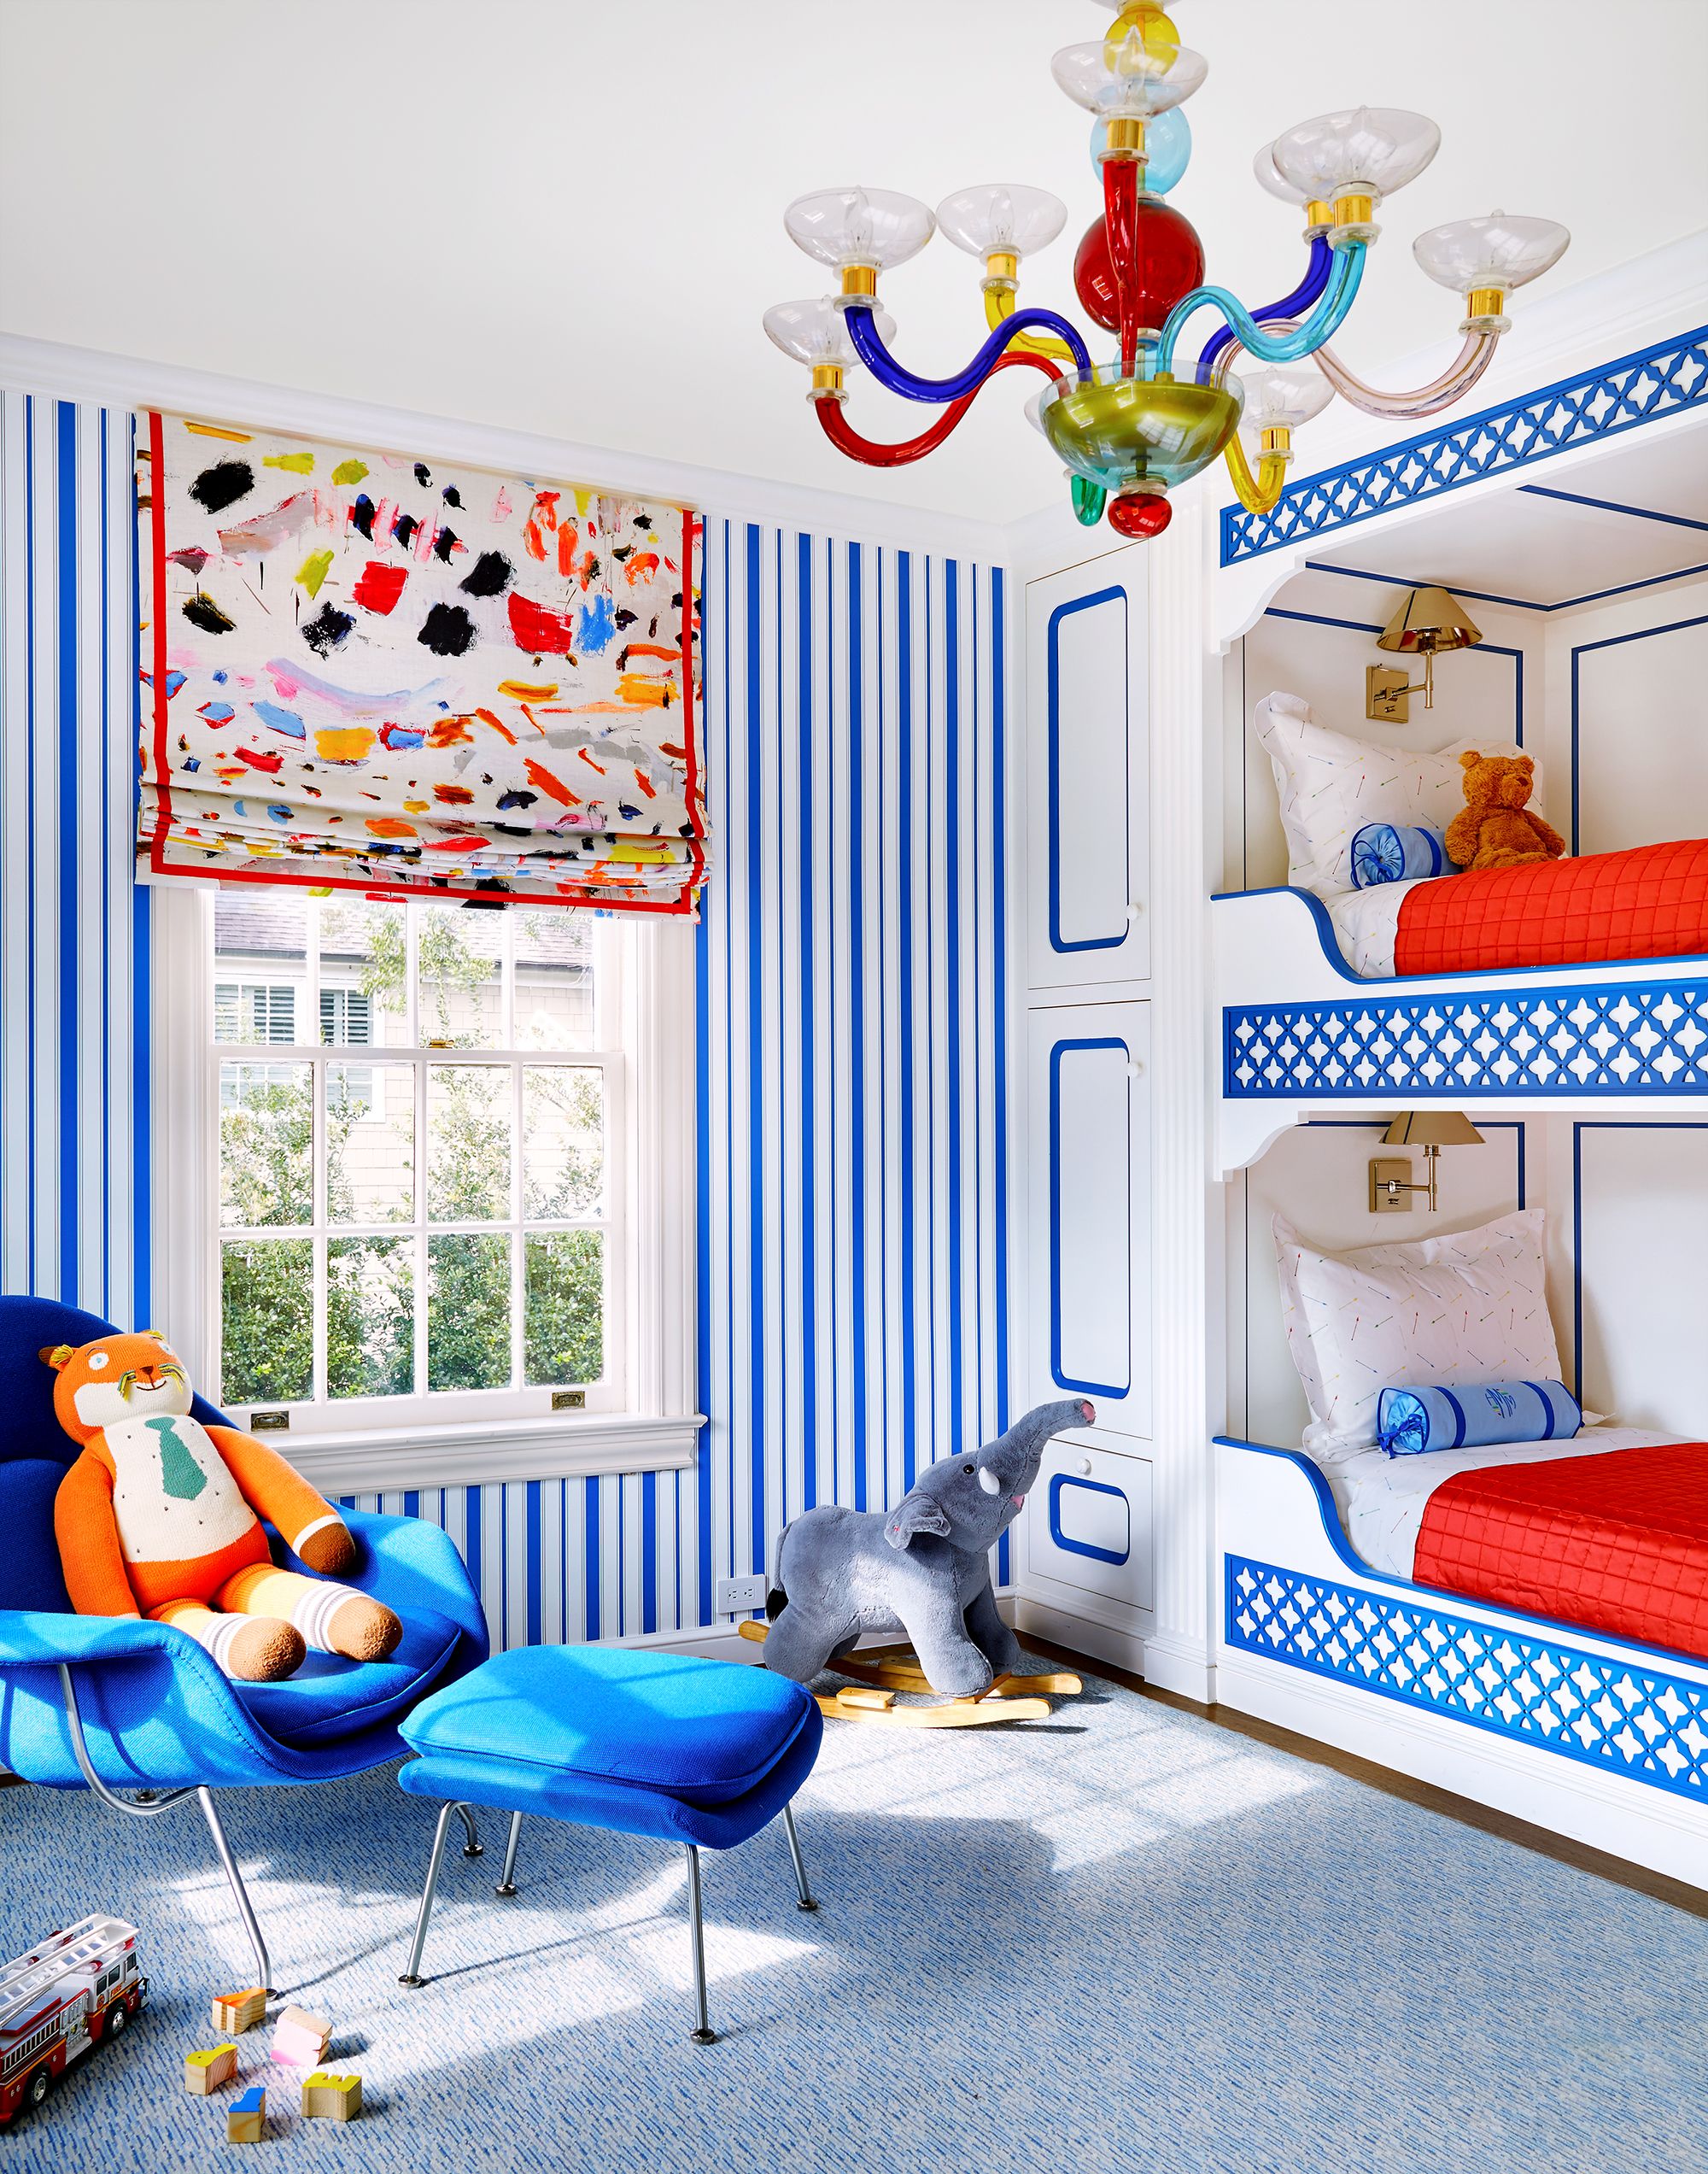 55 Kids Room Design Ideas Cool Kids Bedroom Decor And Style